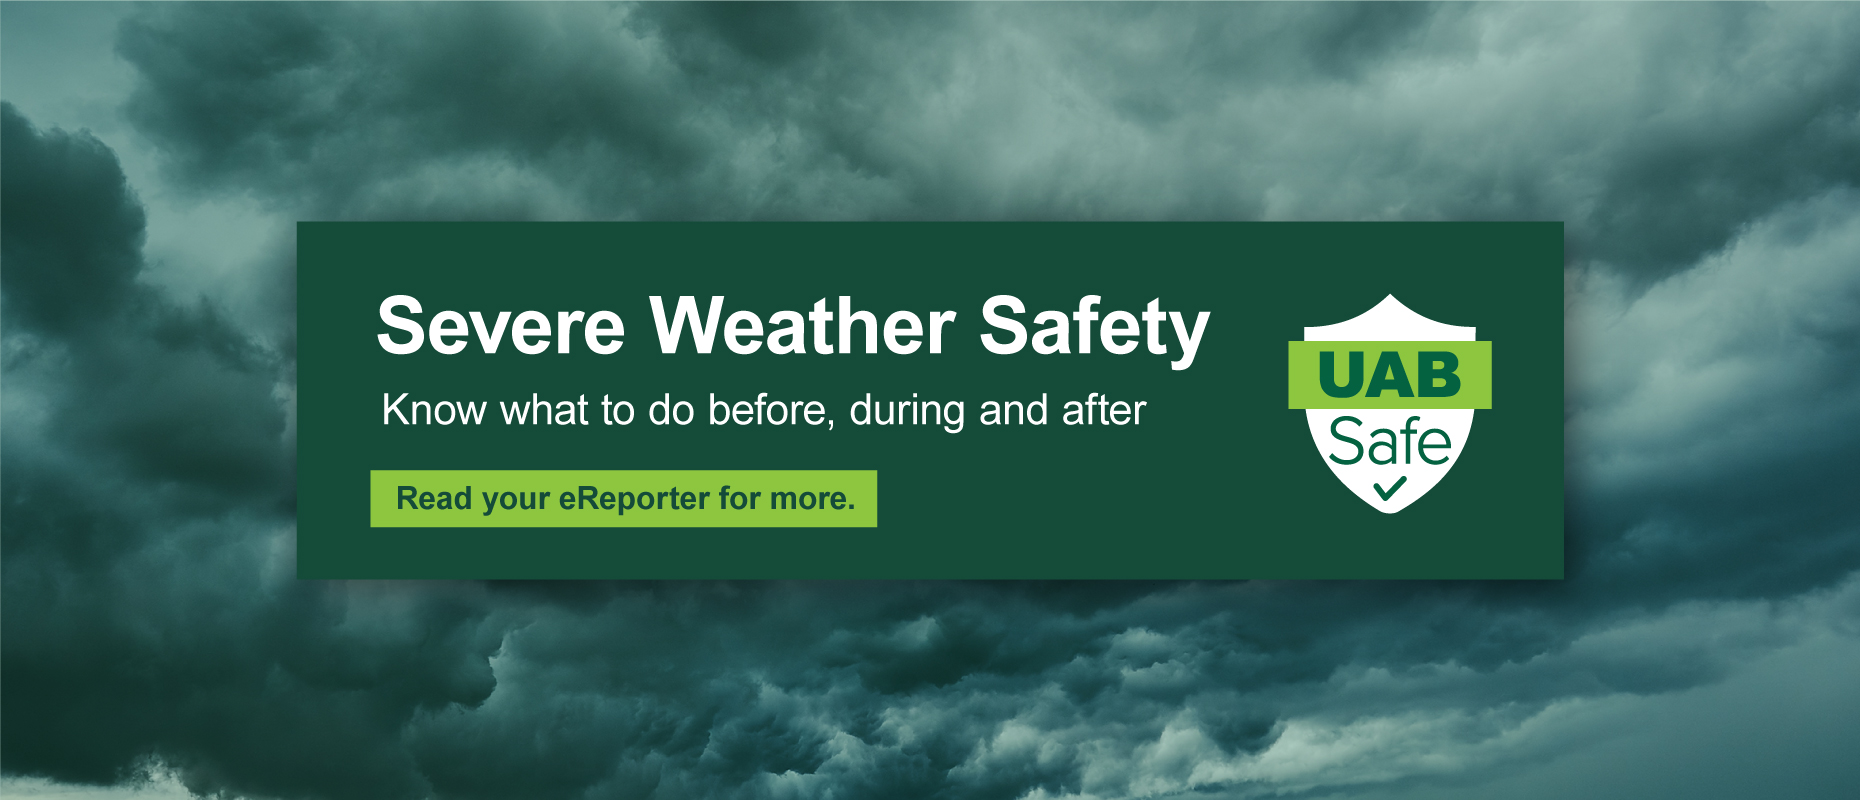 Severe Weather Safety: Know what to do before, during, and after. Read your eReporter for more. UAB Safe.